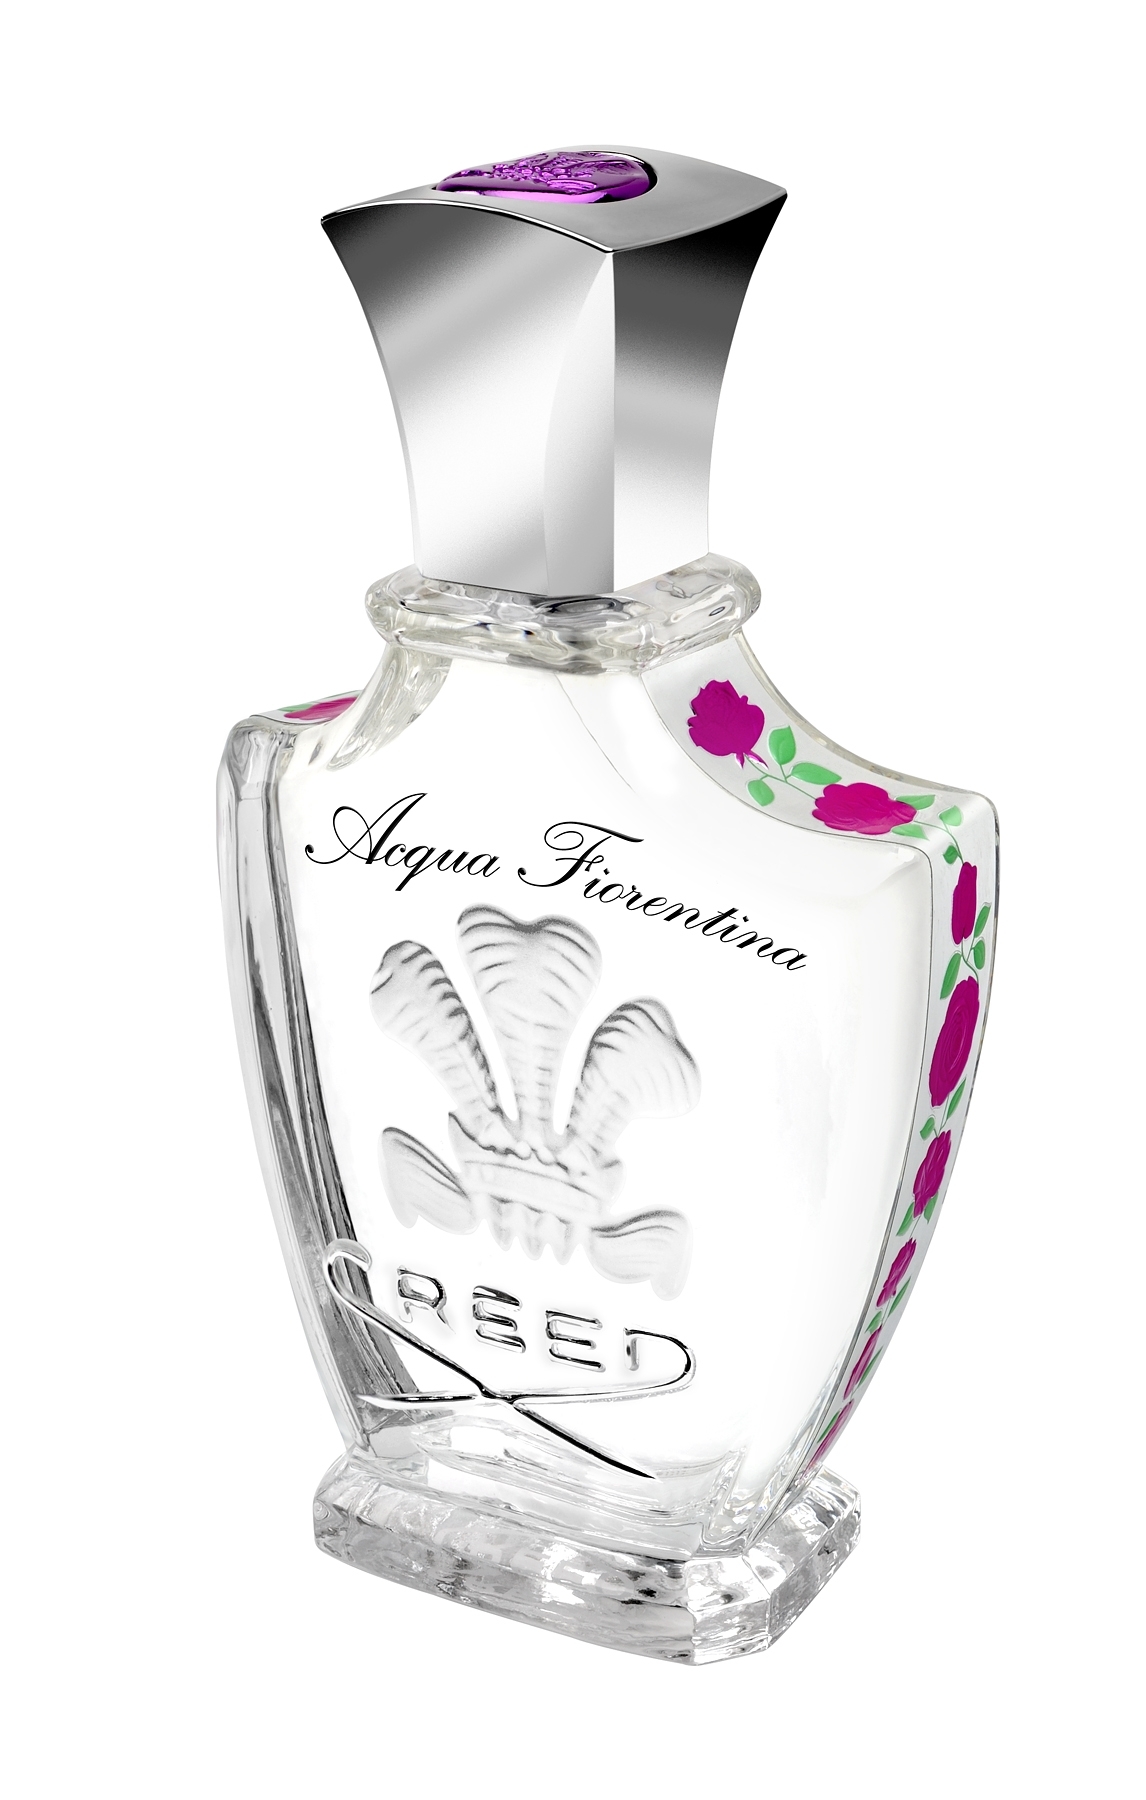 Acqua Fiorentina - The Encore by Creed » Reviews & Perfume Facts